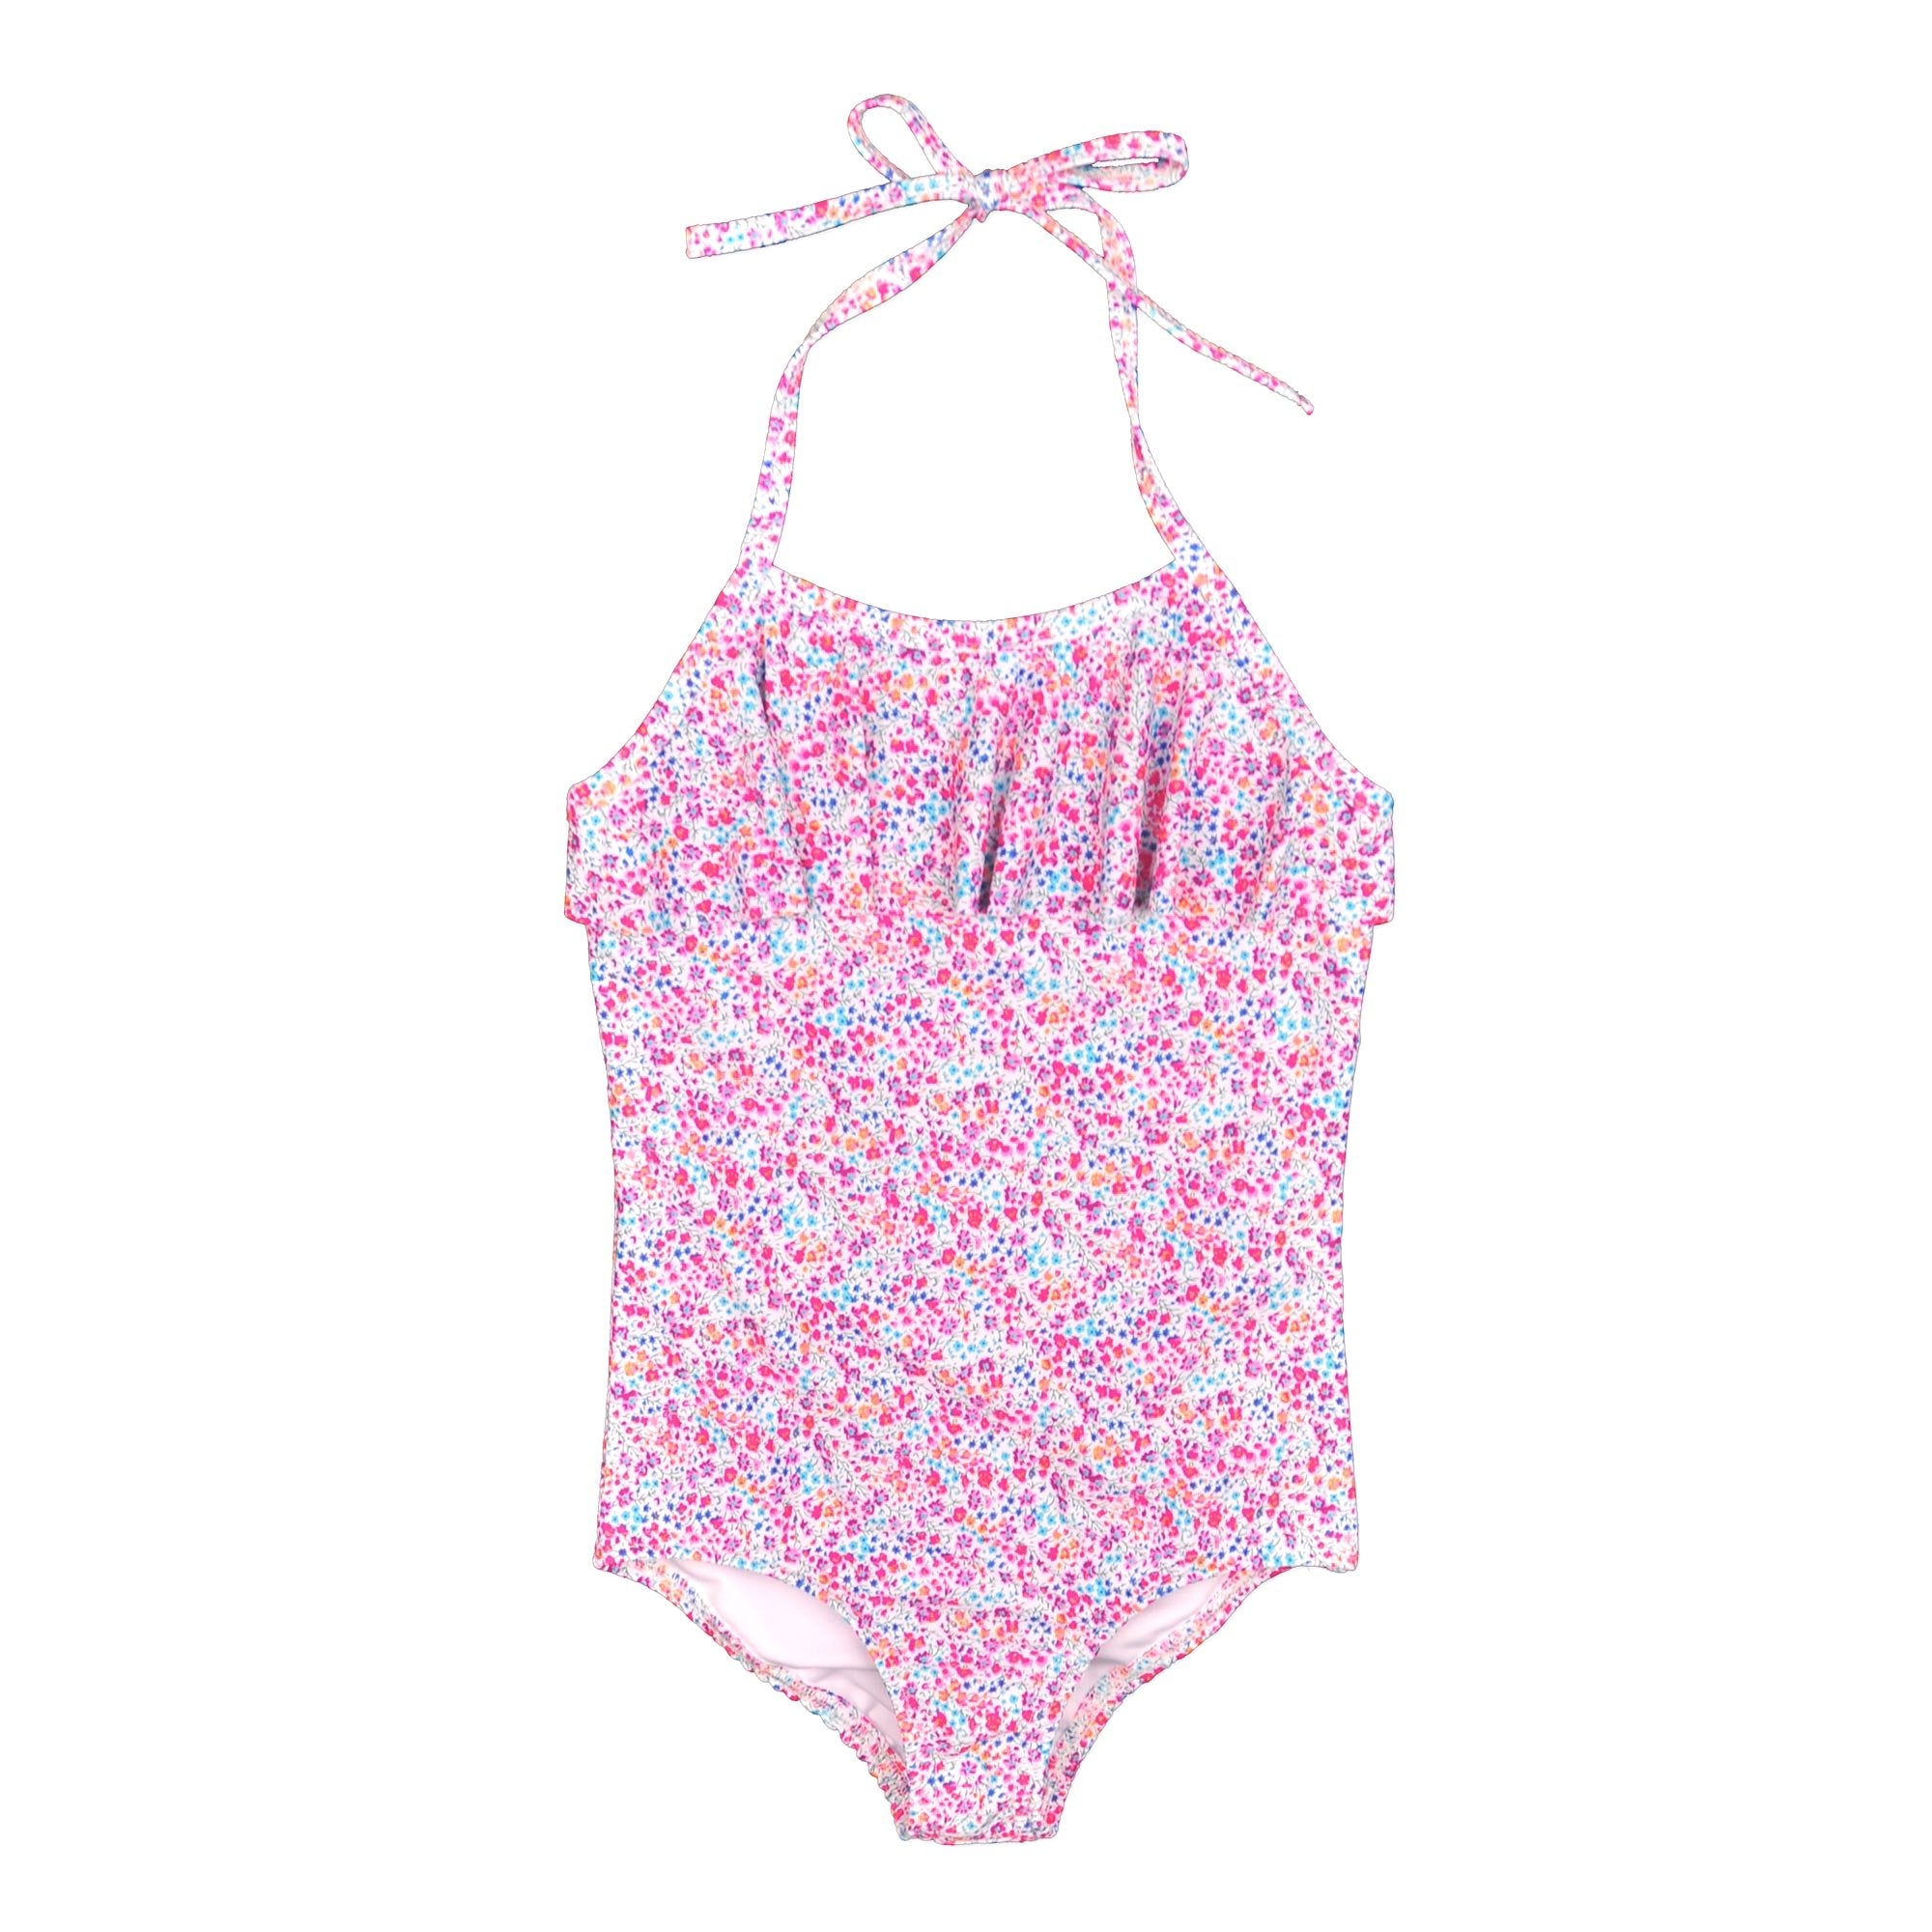 Ava Bright Liberty One Piece - Cou Cou Baby